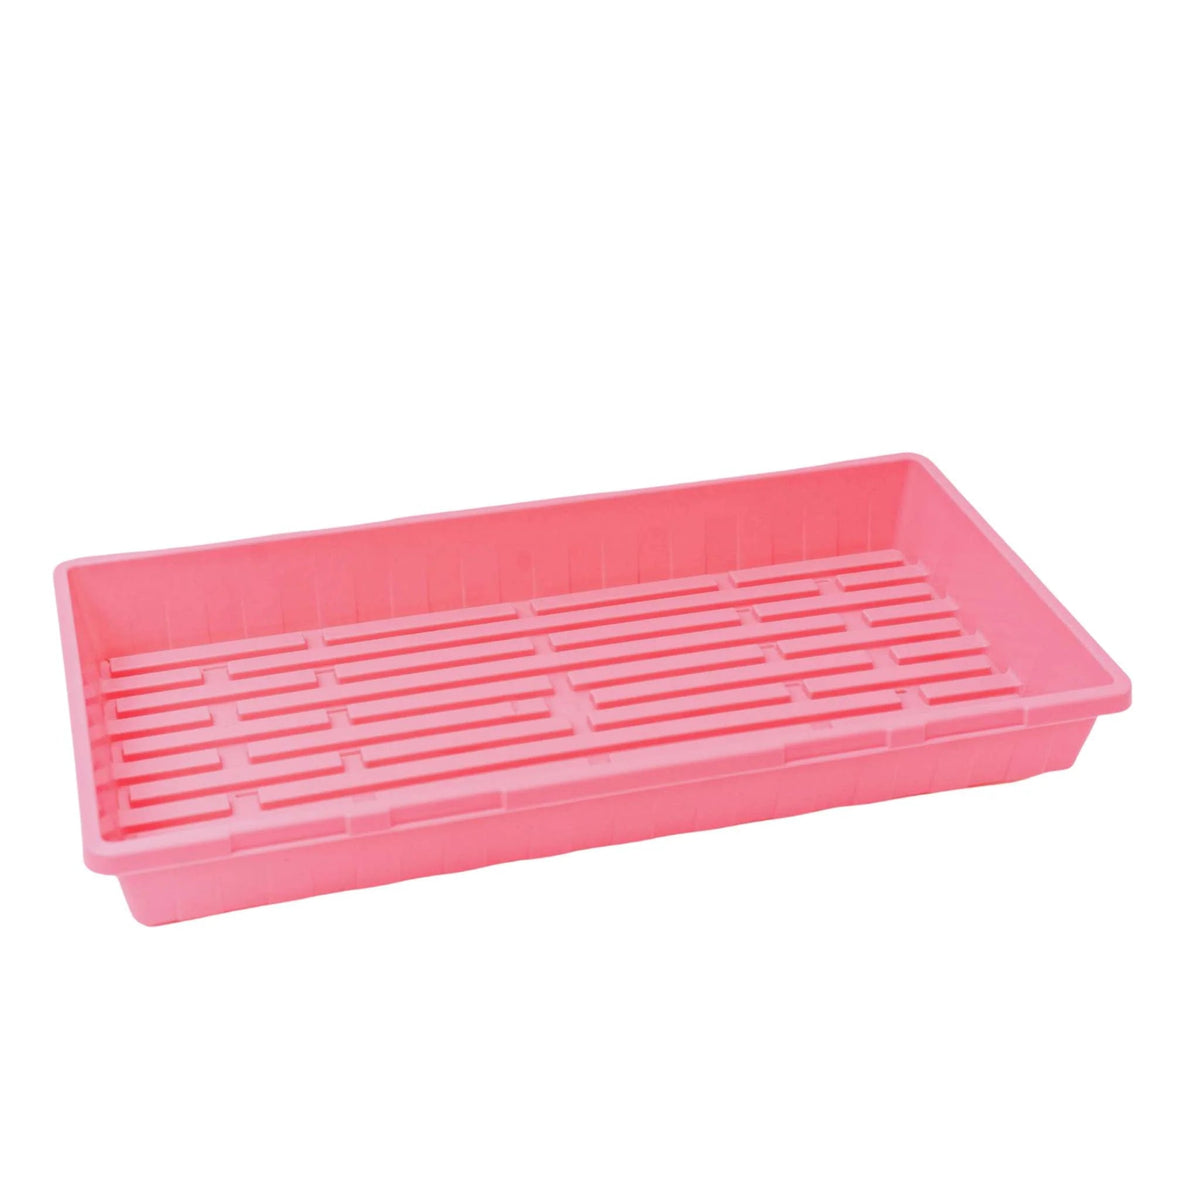 Bootstrap Farmer 1020 Seed Starting Trays, No Holes | Assorted Colors